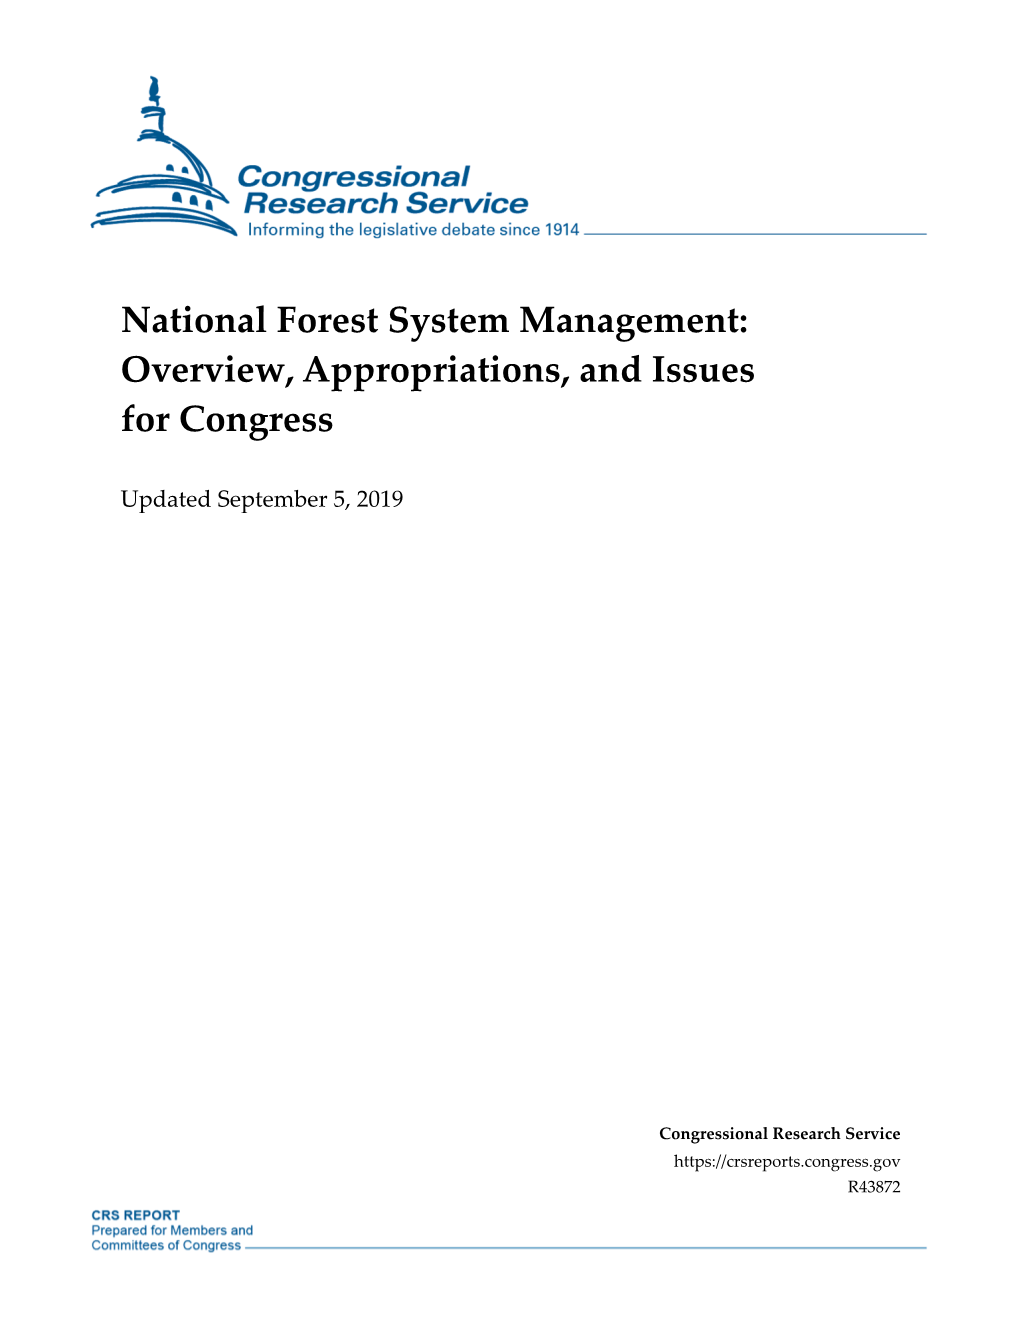 National Forest System Management: Overview, Appropriations, and Issues for Congress